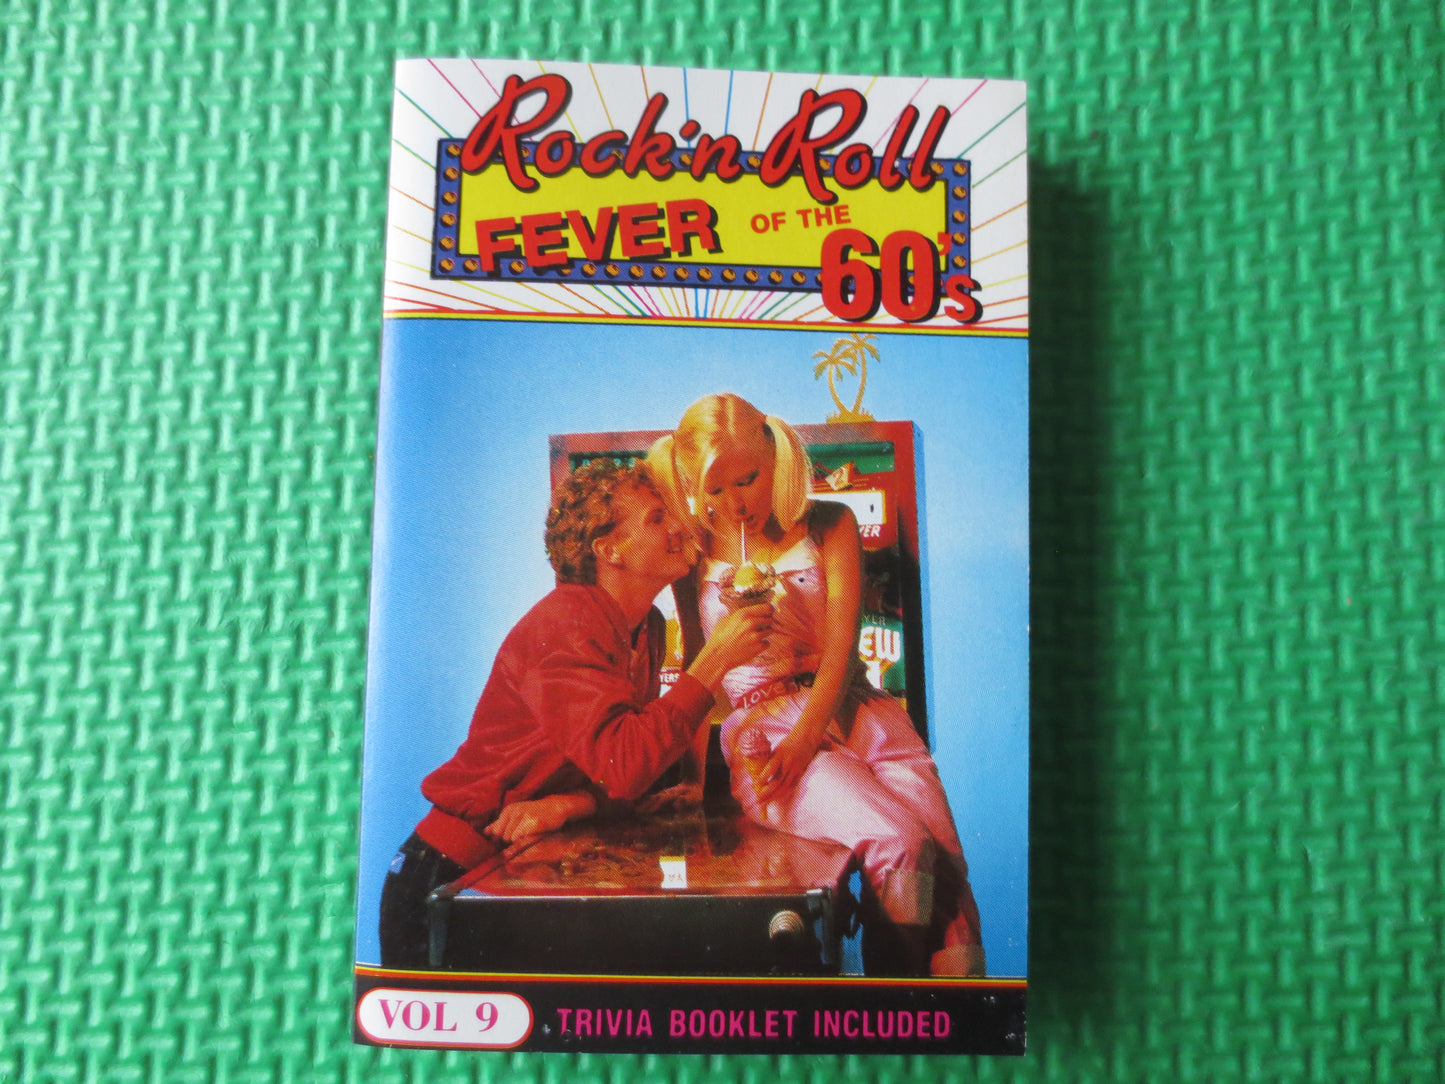 ROCK and ROLL, Vol 9, FEVER of the 60s, Rock and Roll Tapes, Vintage Cassette, Tape Cassette, Tapes, Music Cassette, 1970 Cassette